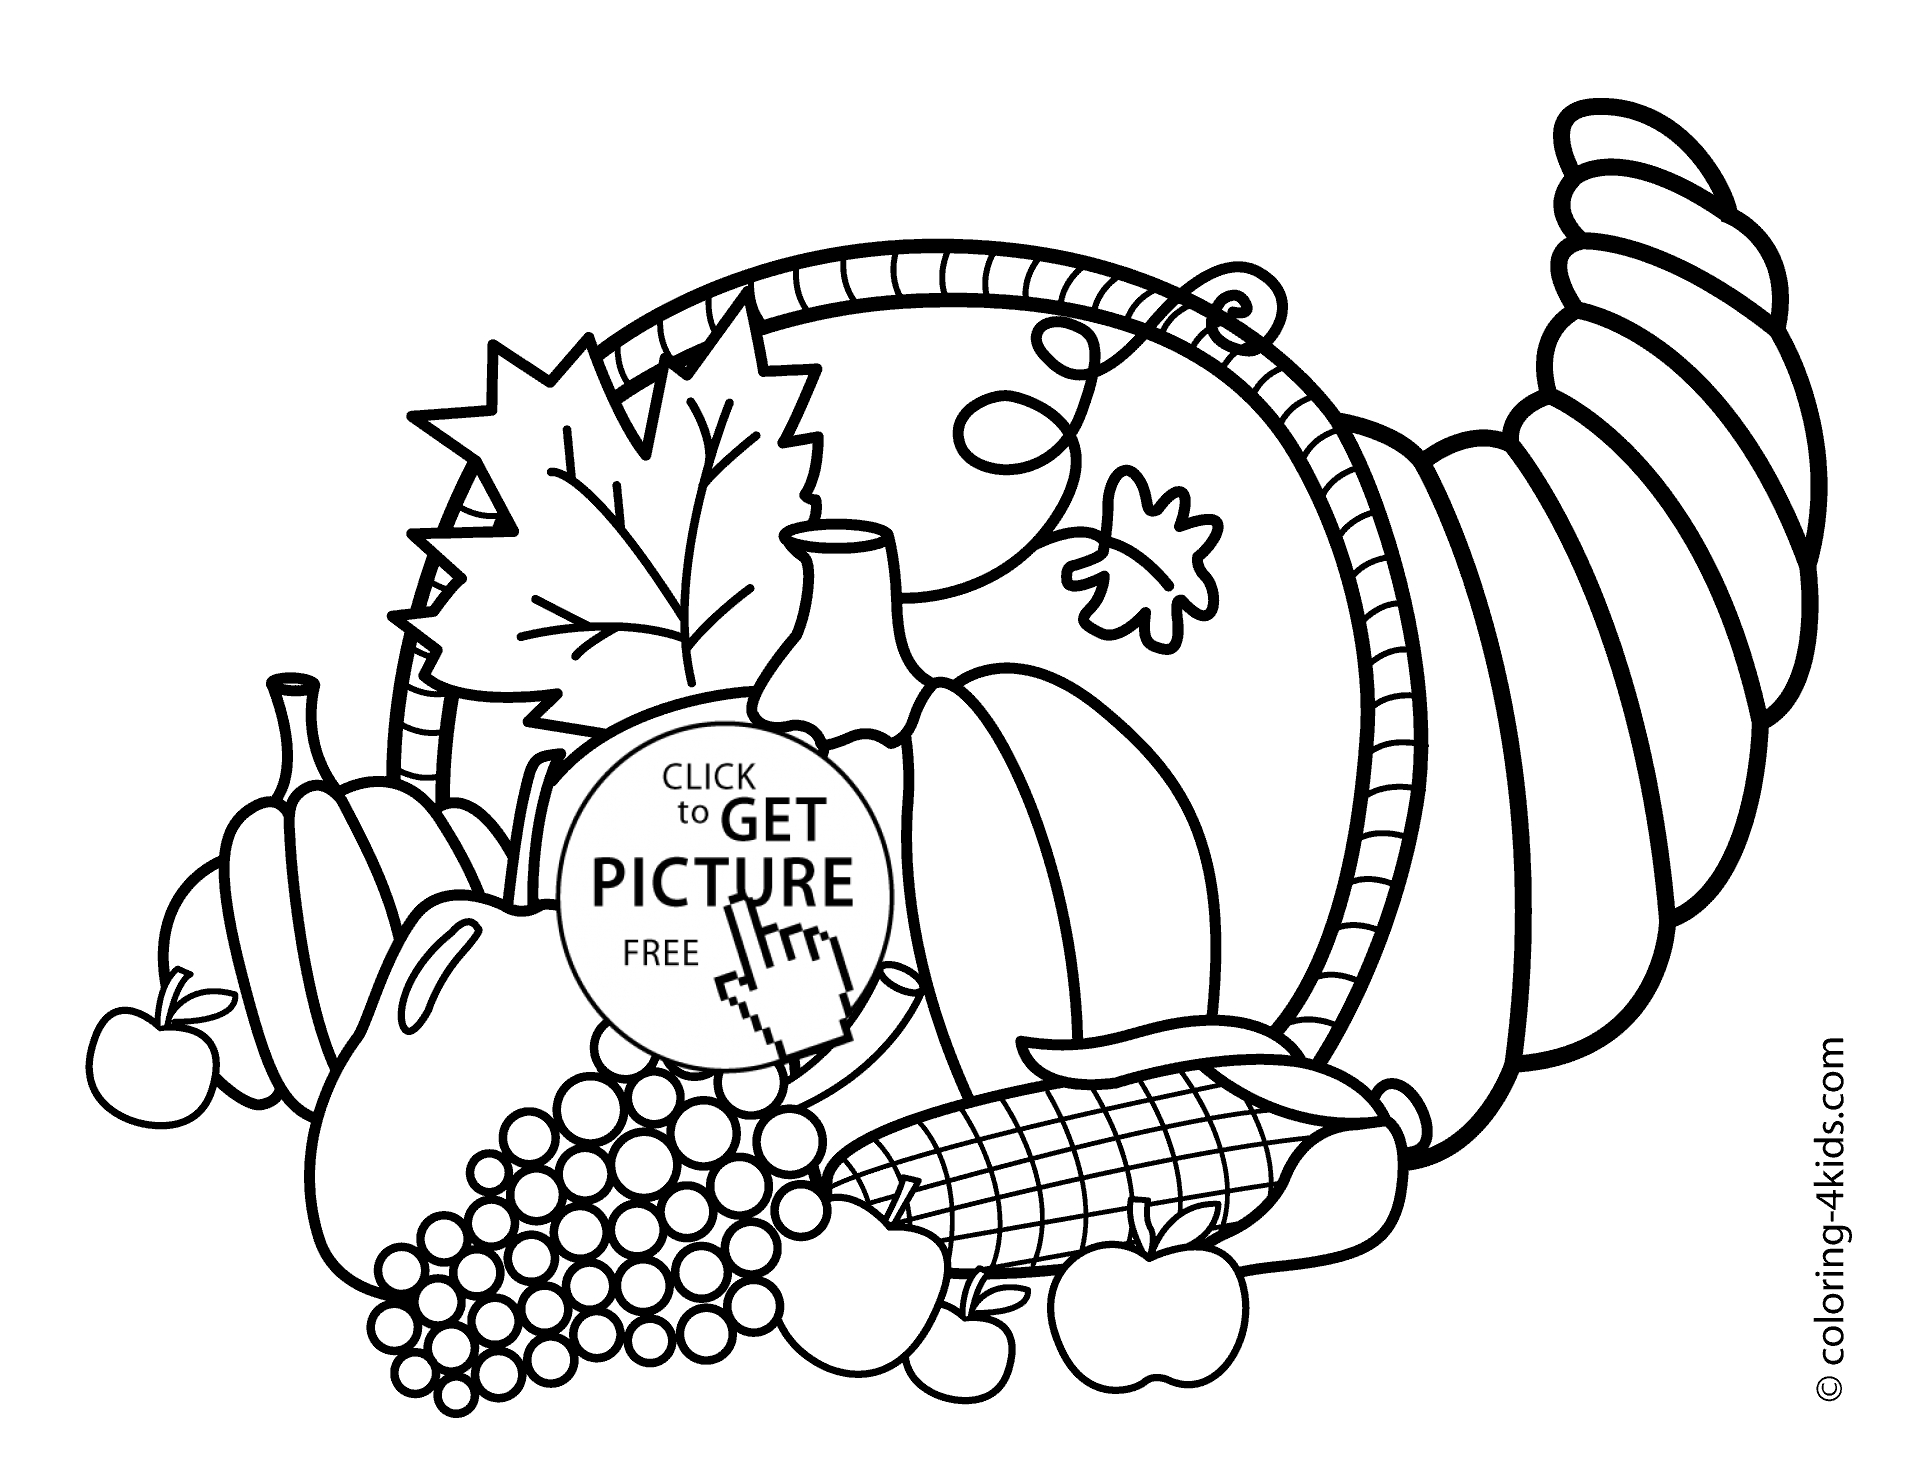 Thanksgiving Day Coloring Pages Free Thanksgiving Day Coloring Pages For Kids Vegetables Printable Free